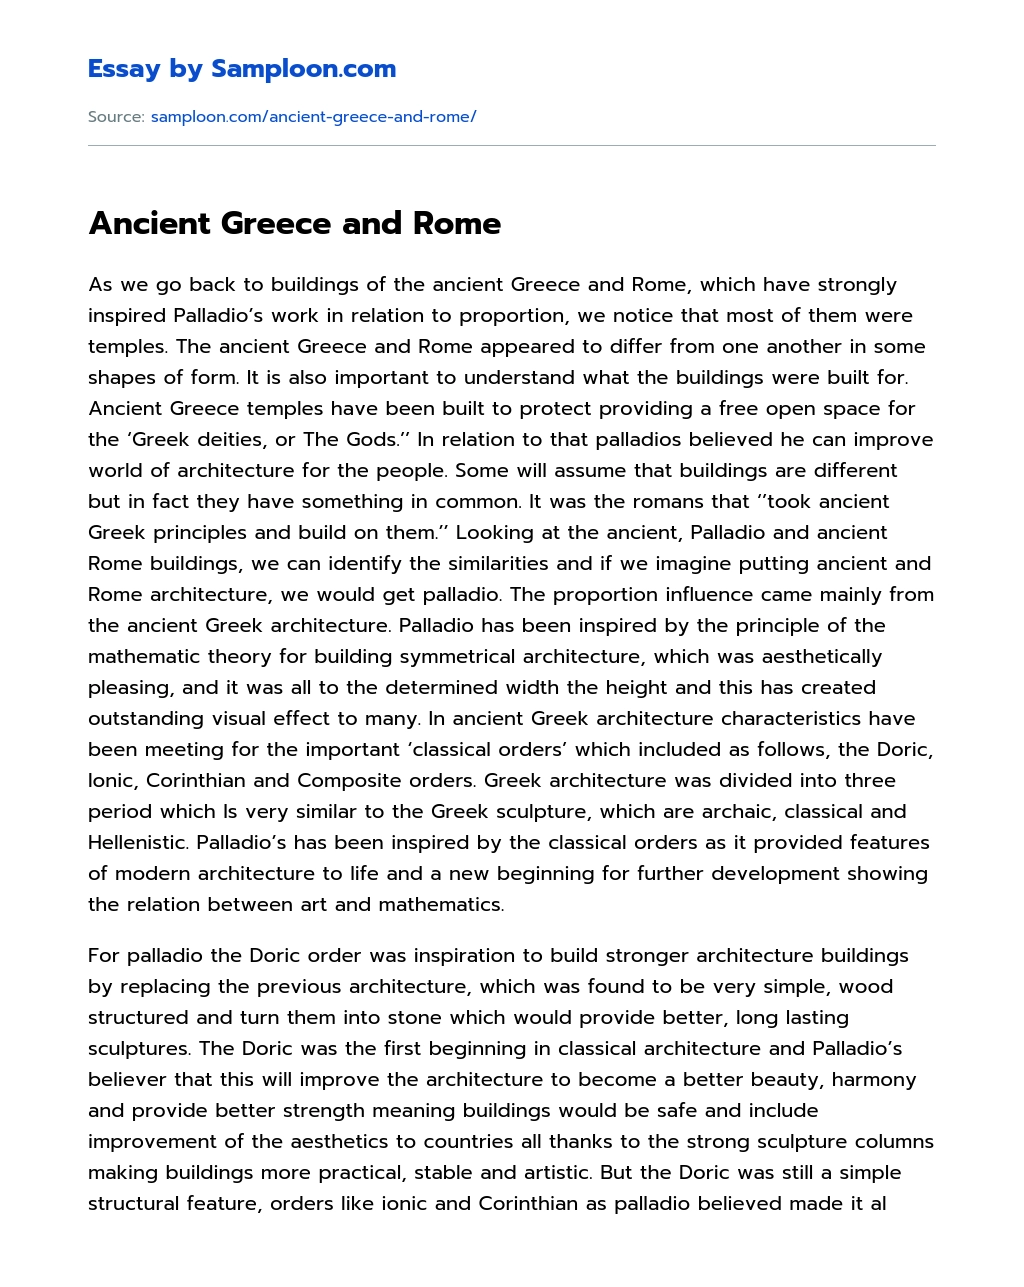 Ancient Greece and Rome essay